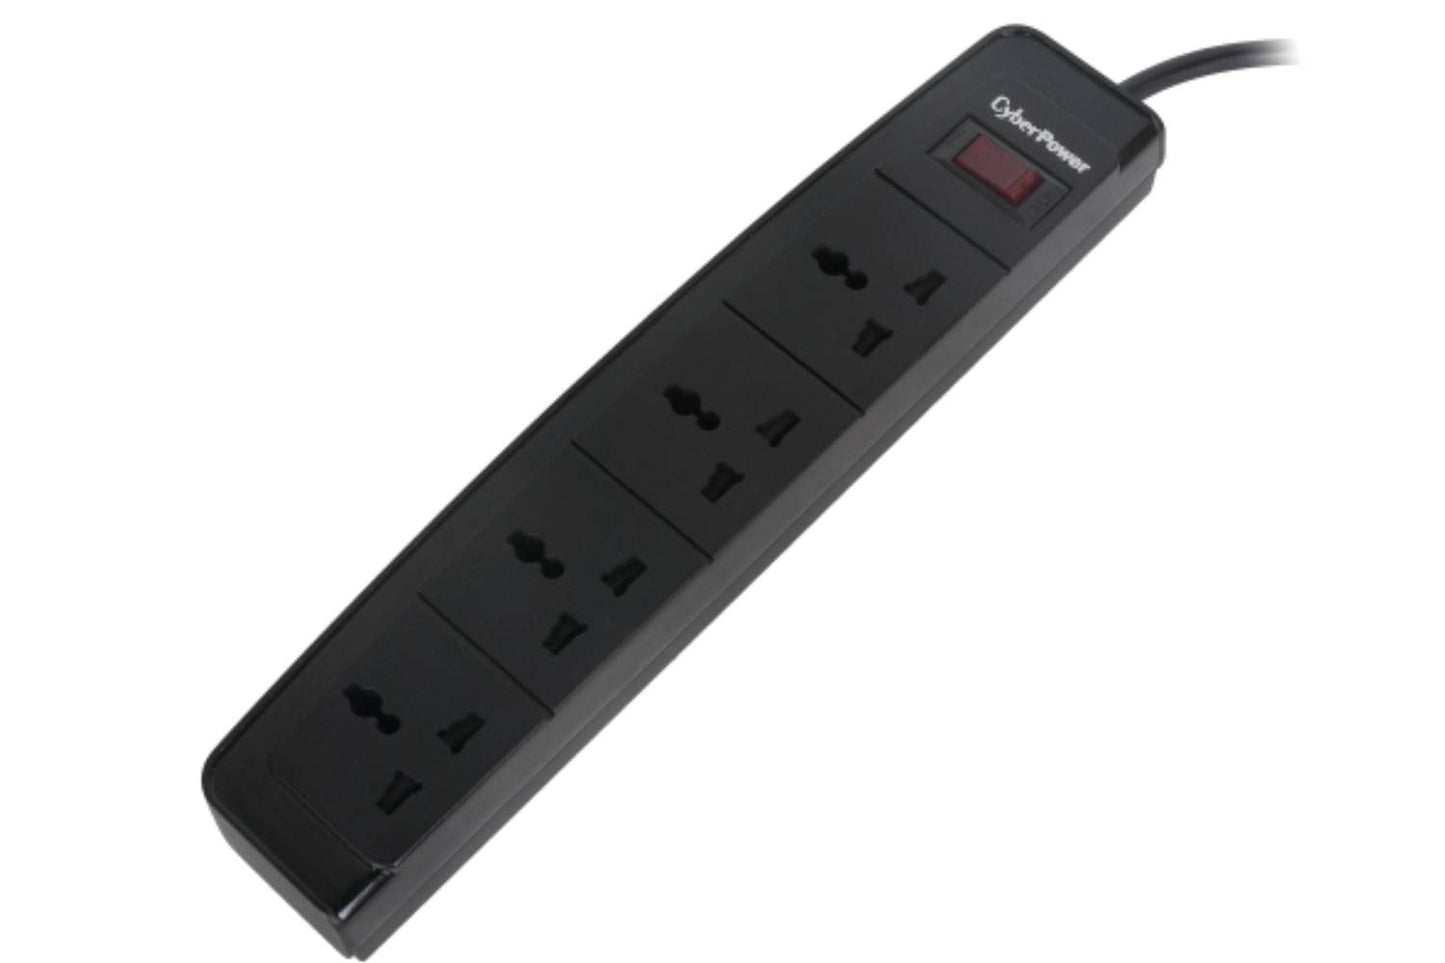 Cyberpower Surge Protector 4 Way, Universal Sockets